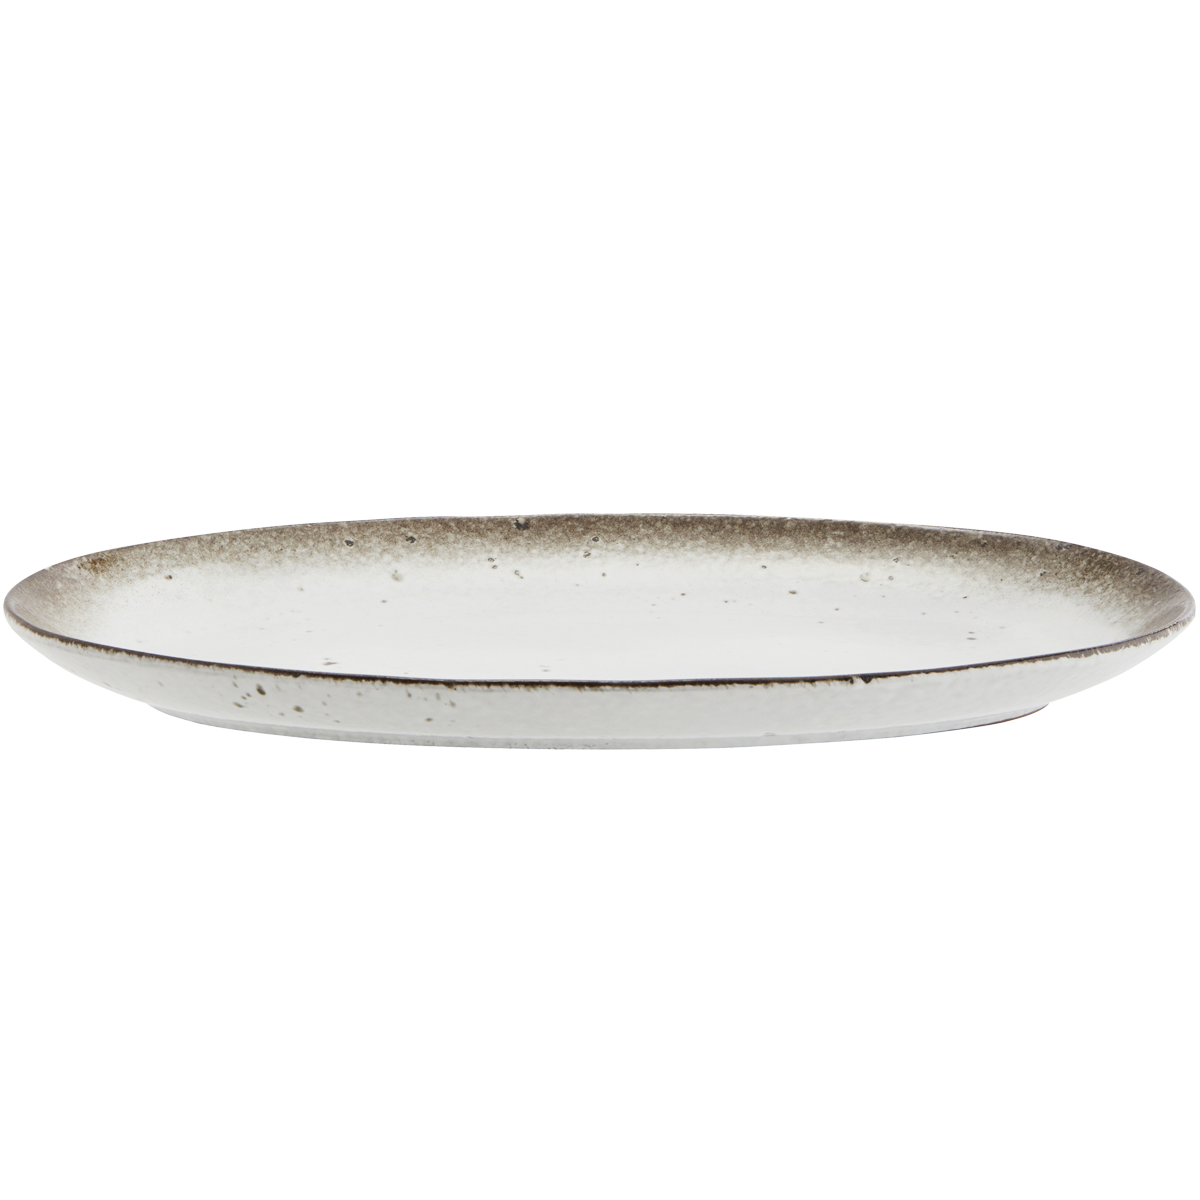 Oval serving dish